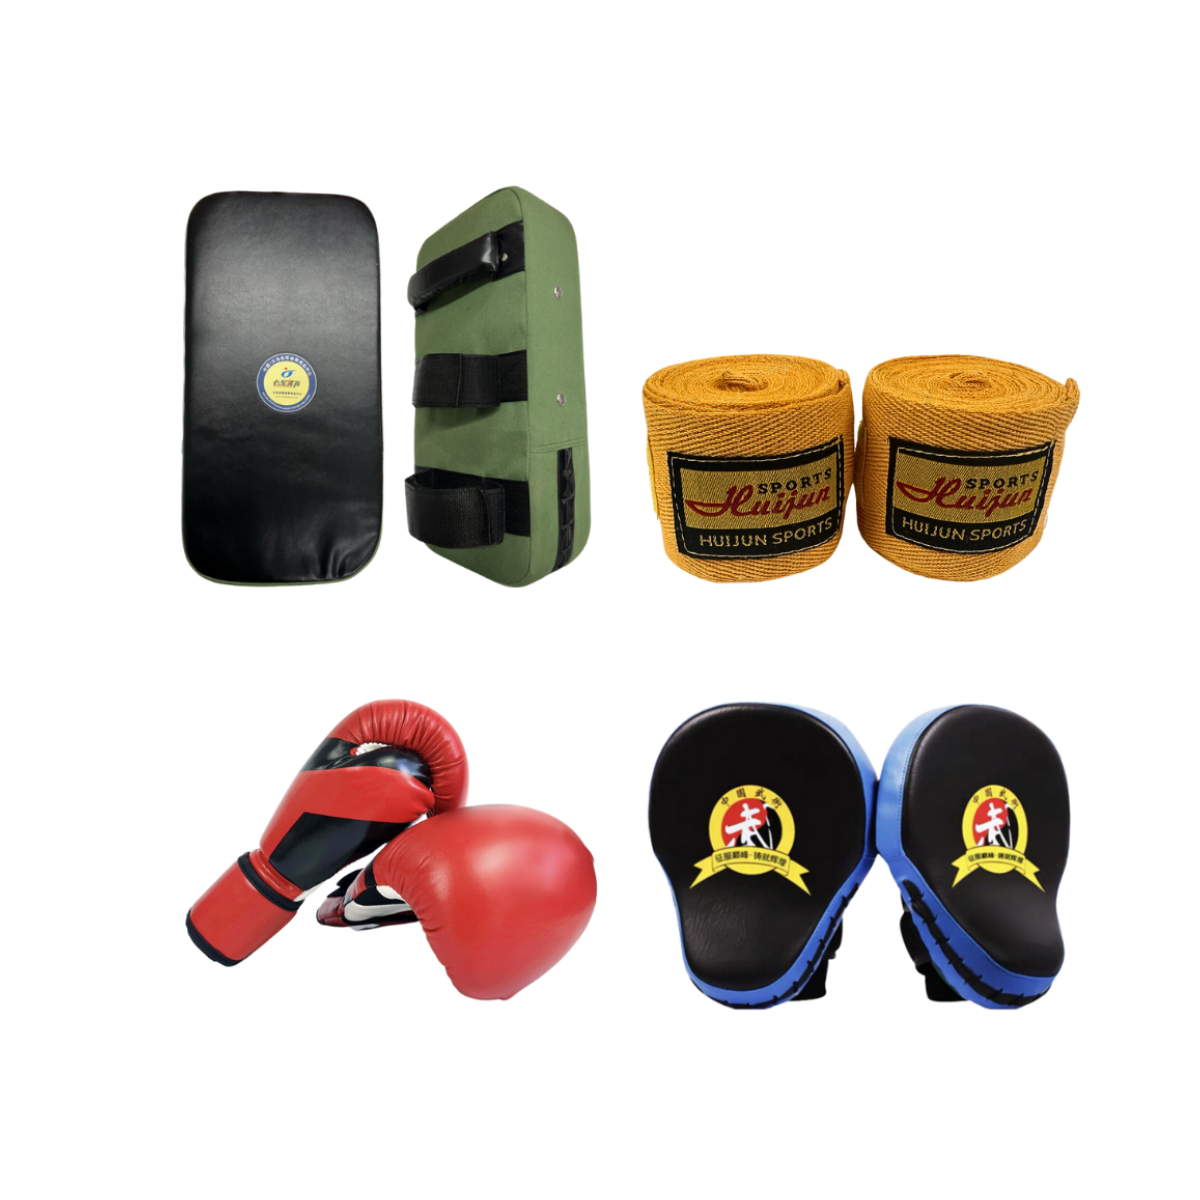 Boxing Gear Package Deal for Adults